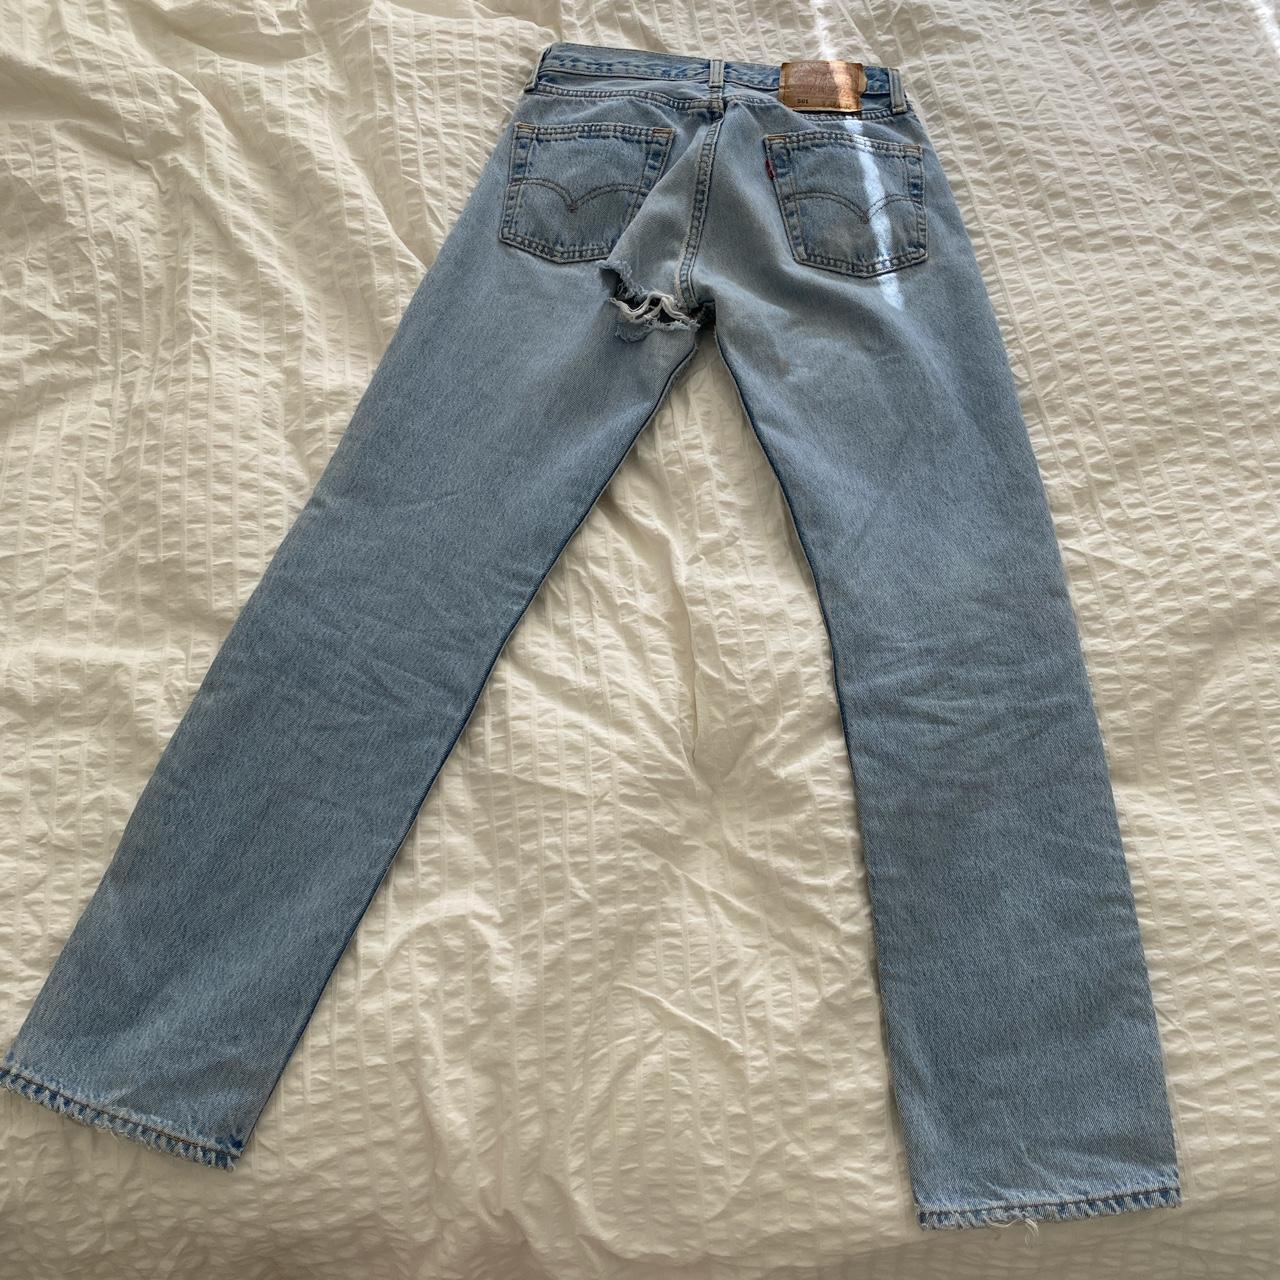 vintage 501 levis w/ hole in the butt :) could put a... - Depop